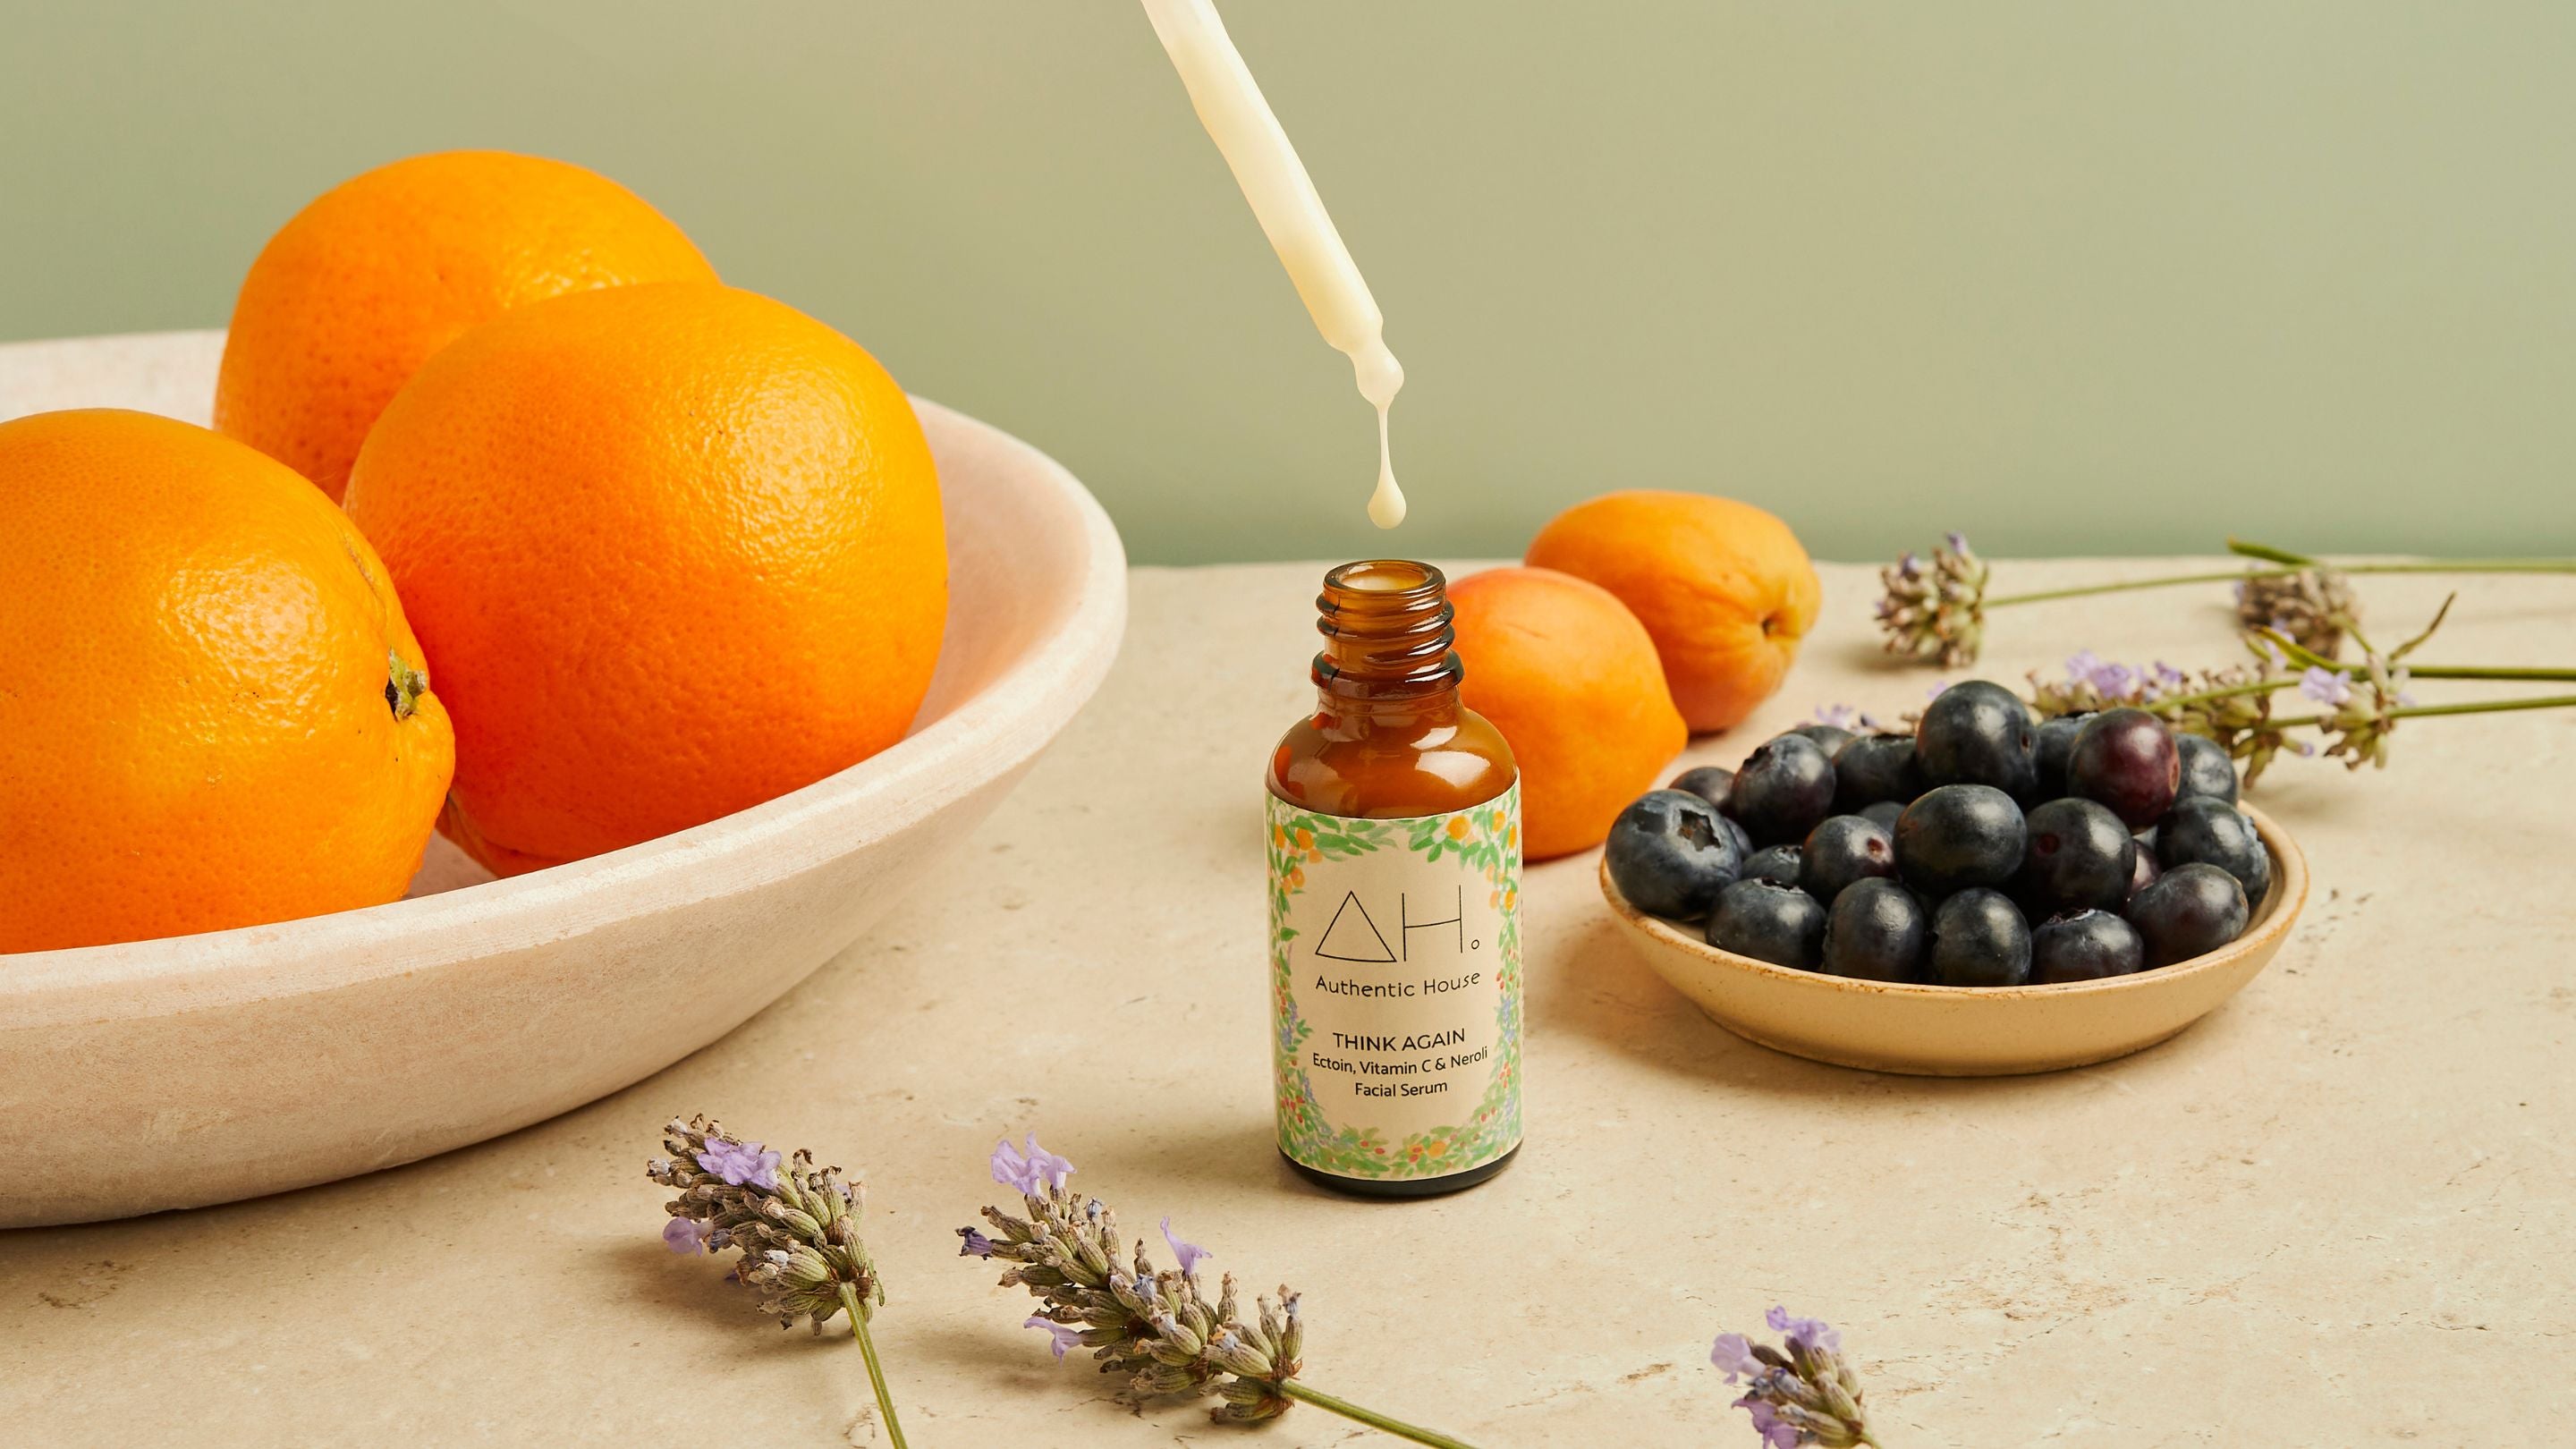 Think Again Facial Serum with dropper, oranges and blueberries